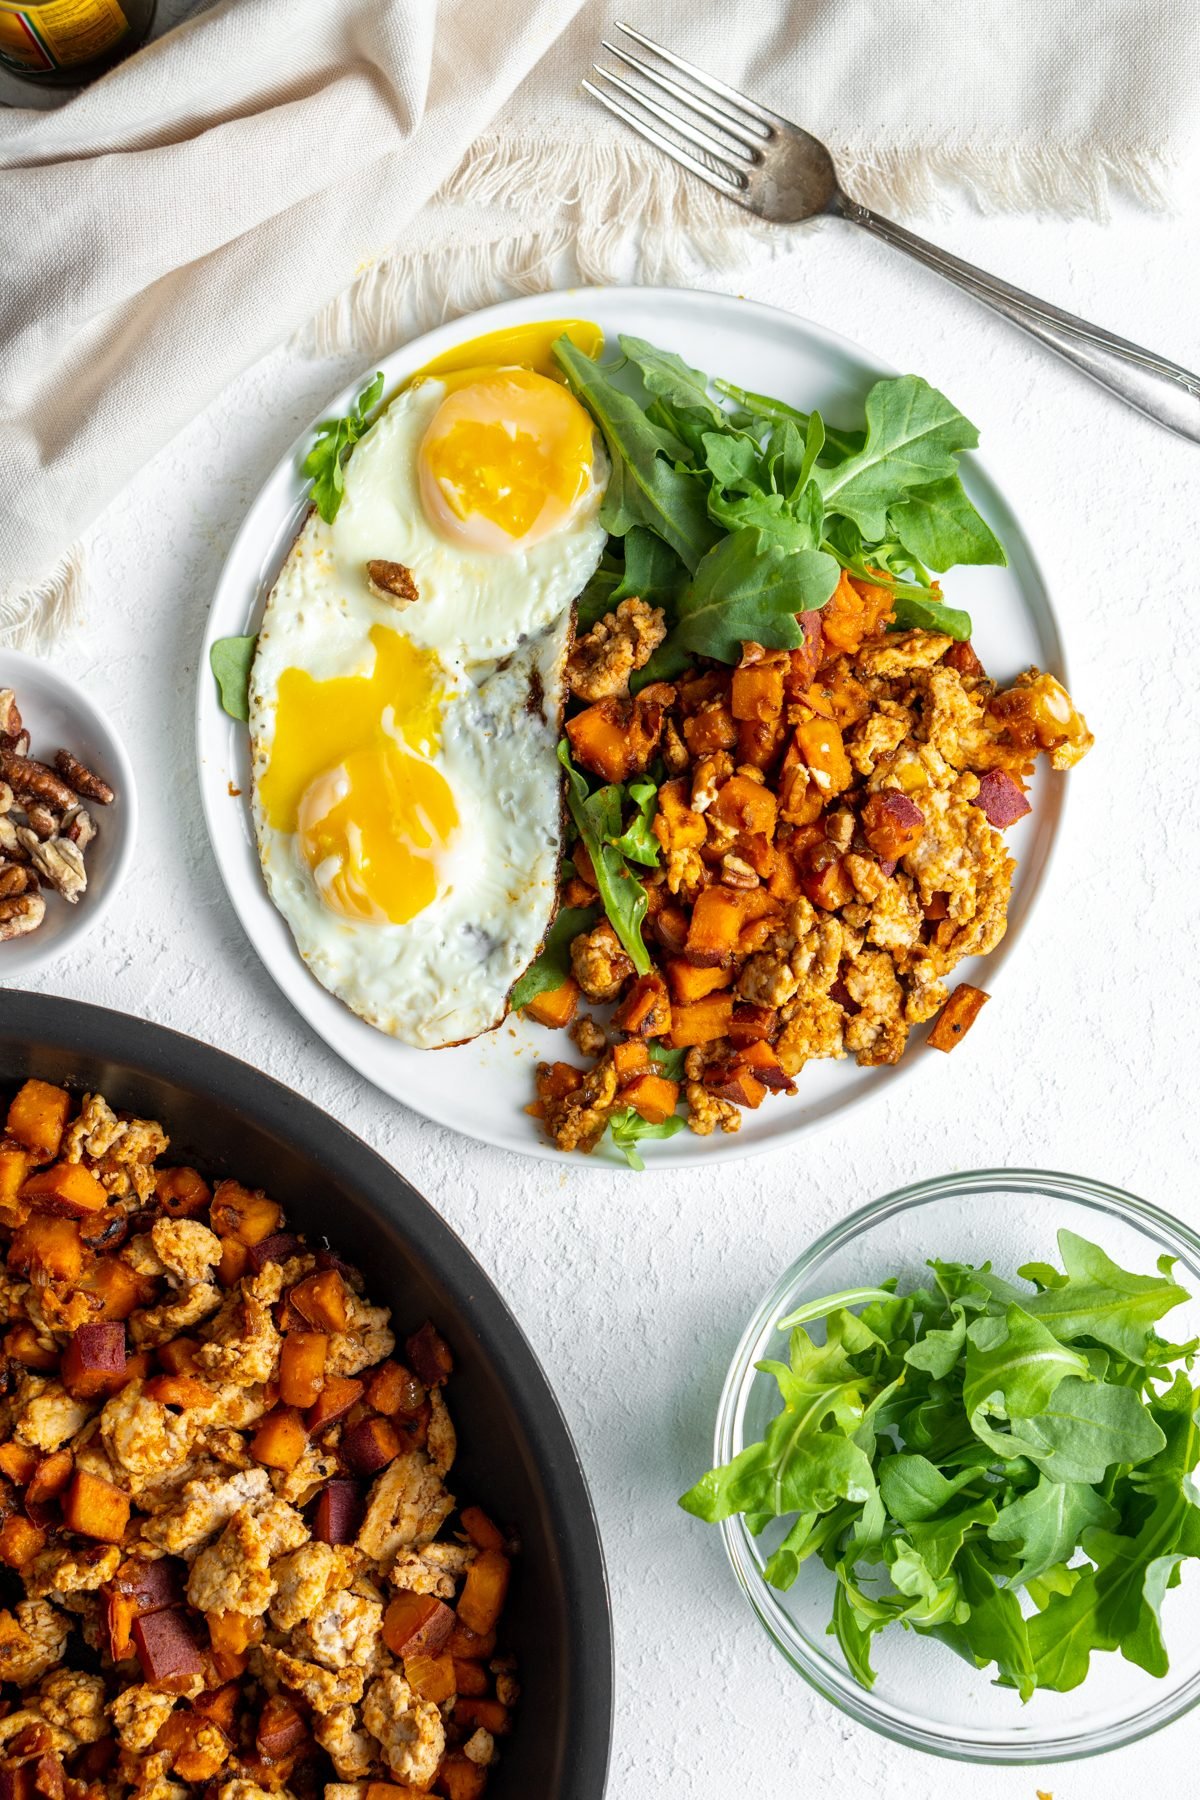 Turkey sweet potato hash on a plate with eggs and greens.